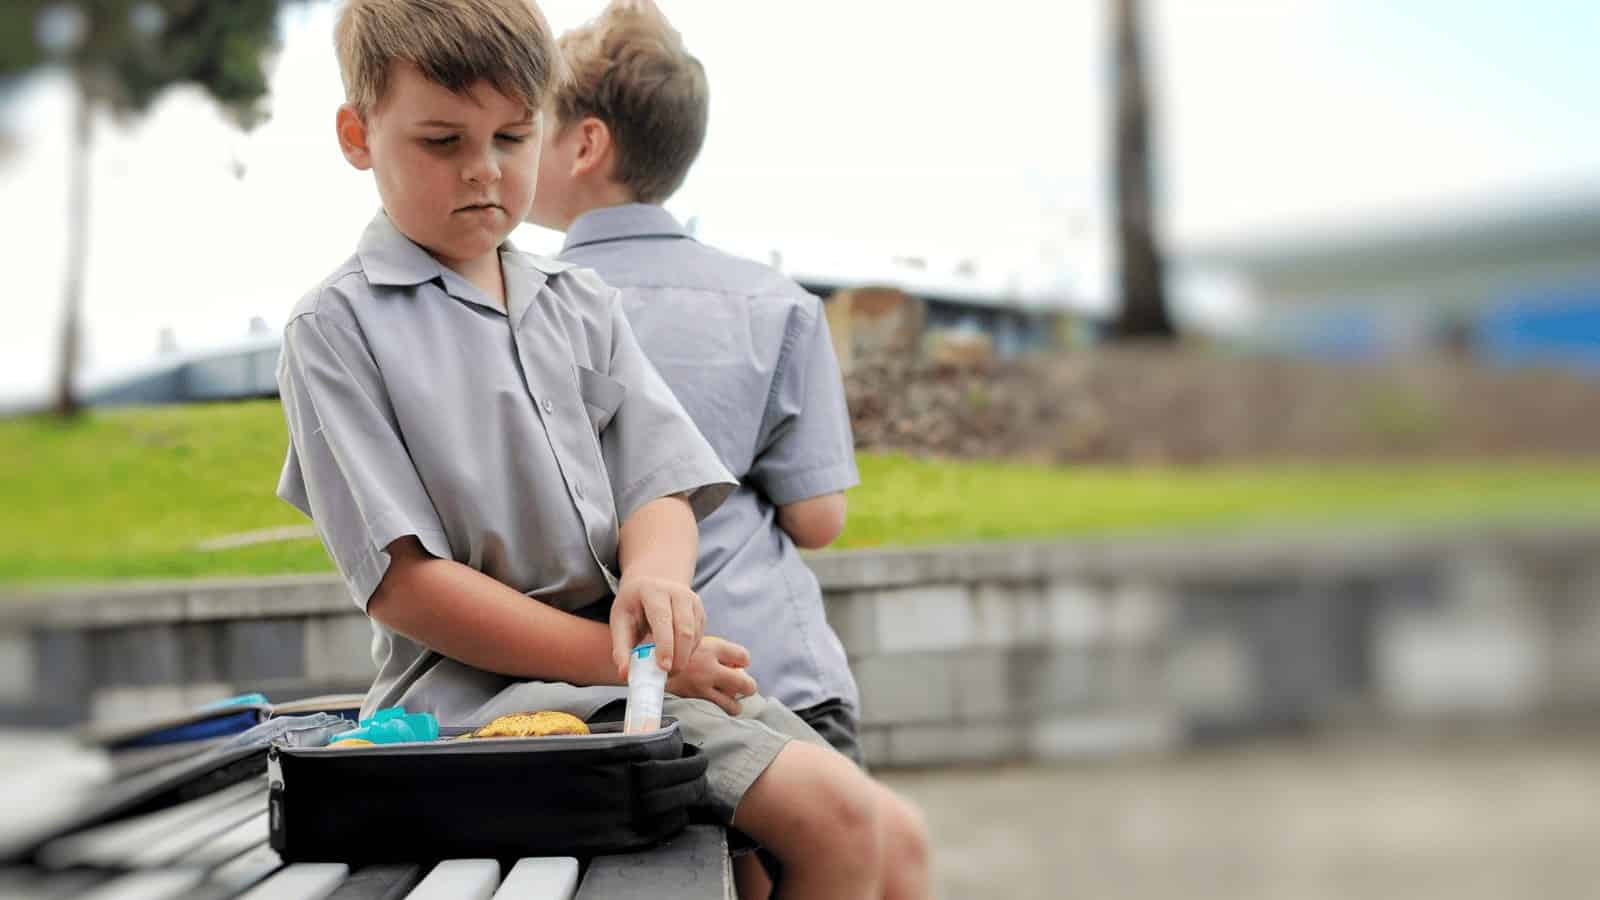 Pediatricians Reveal Kids Living With Food Allergies Get Bullied More Often